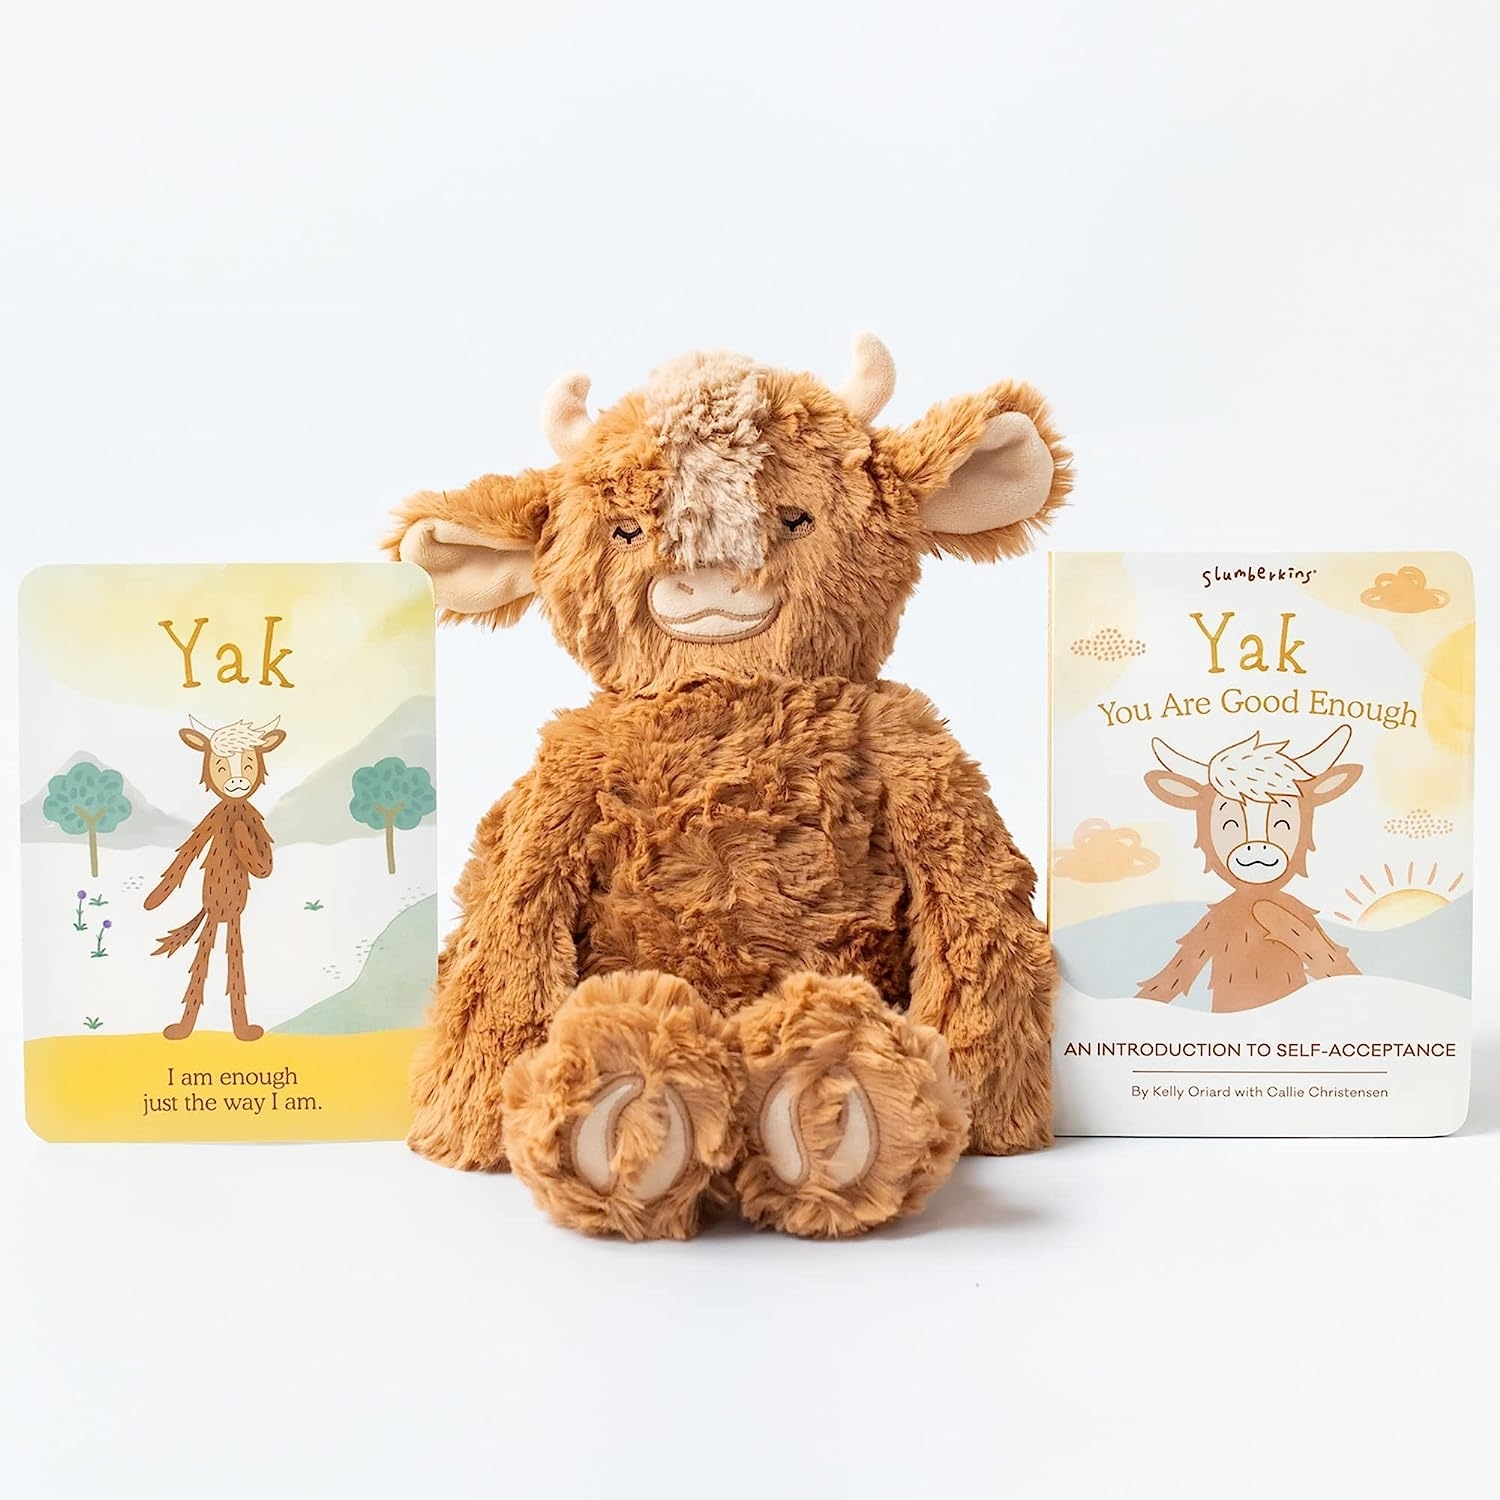 yak doll with card and book